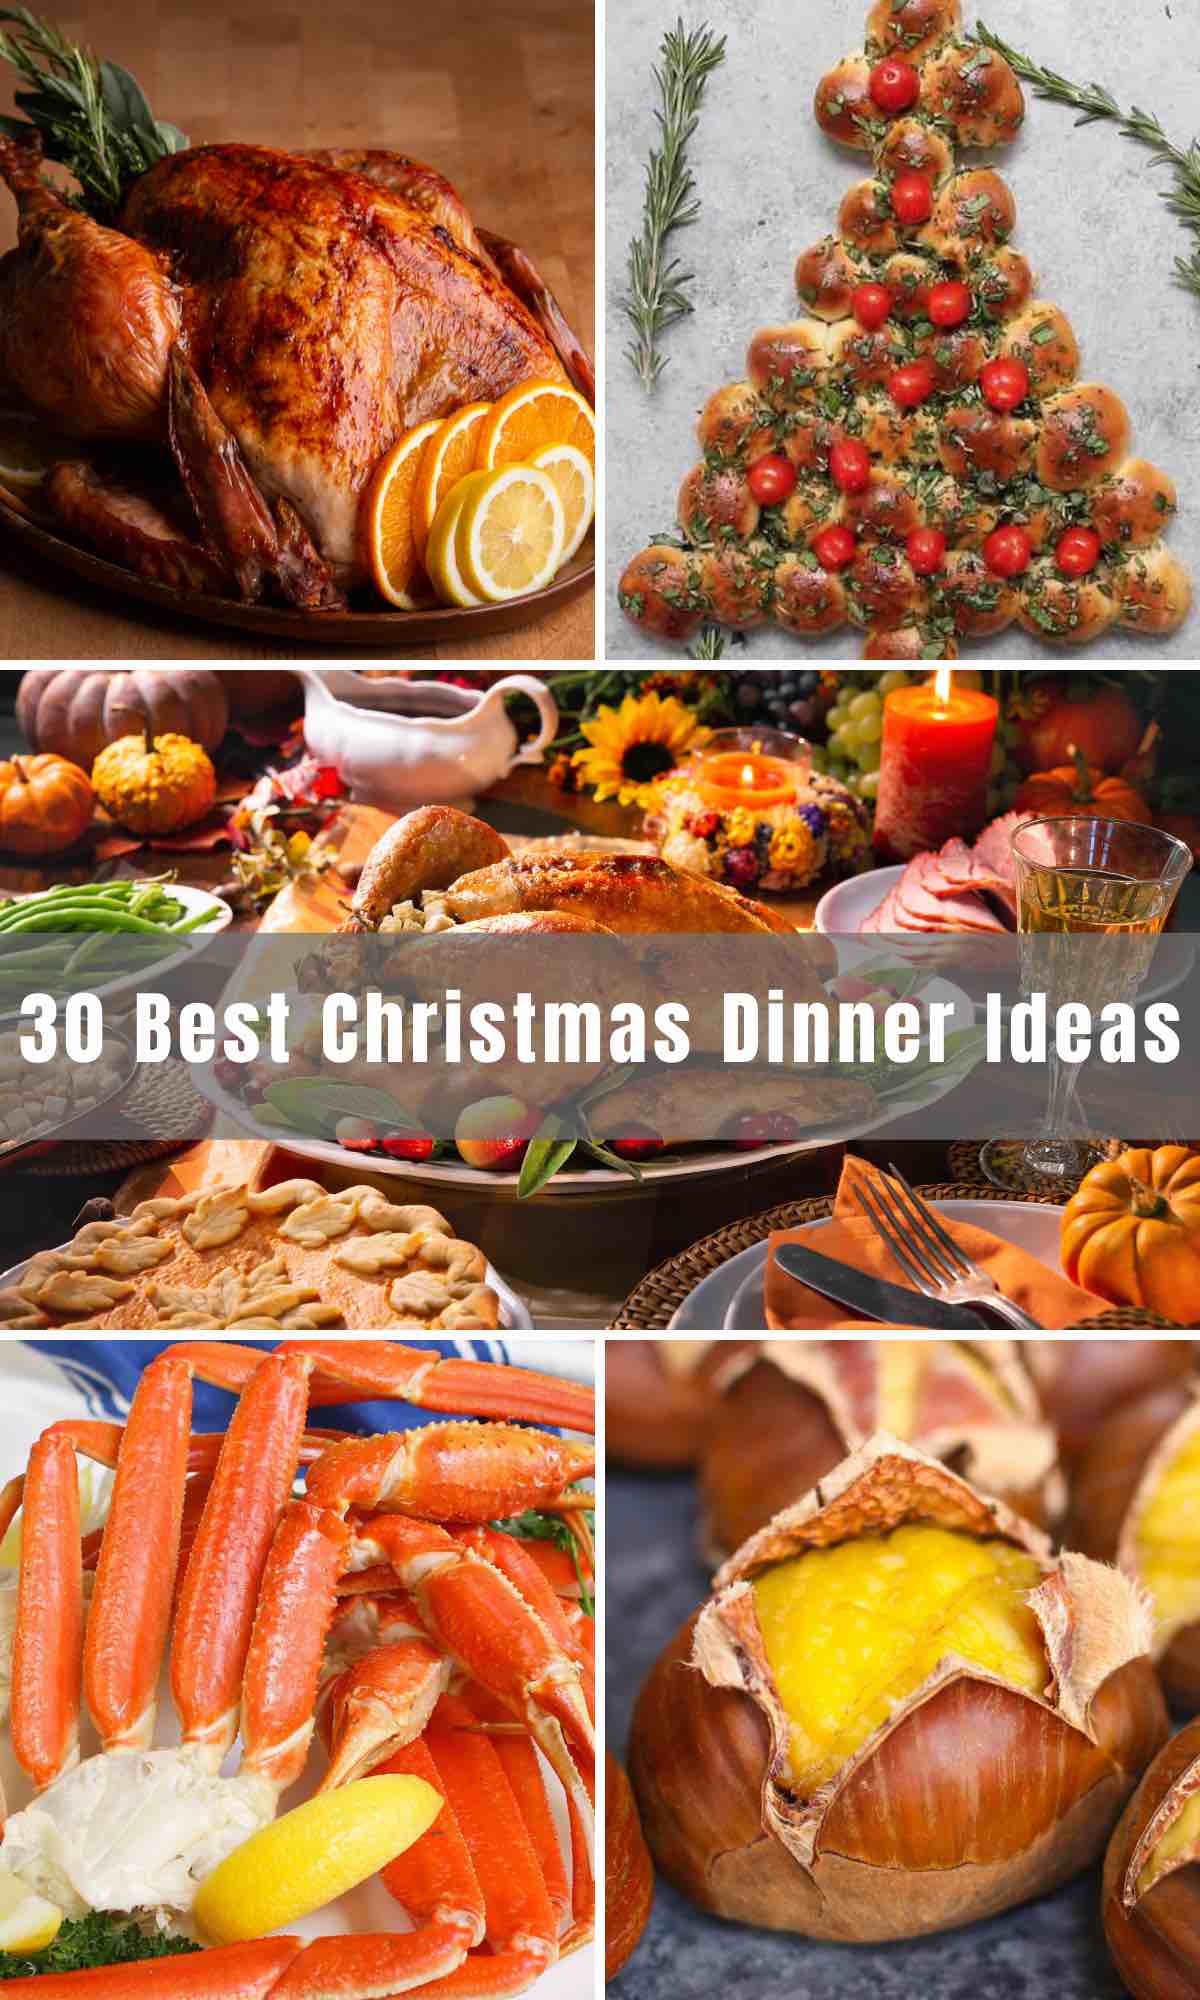 It’s that time of year, and Christmas is right around the corner. We have rounded up 30 of the Best Christmas Dinner Ideas for a perfect feast. From prime rib roast to roasted turkey to Christmas side dishes and desserts, you've got a menu your family will love!